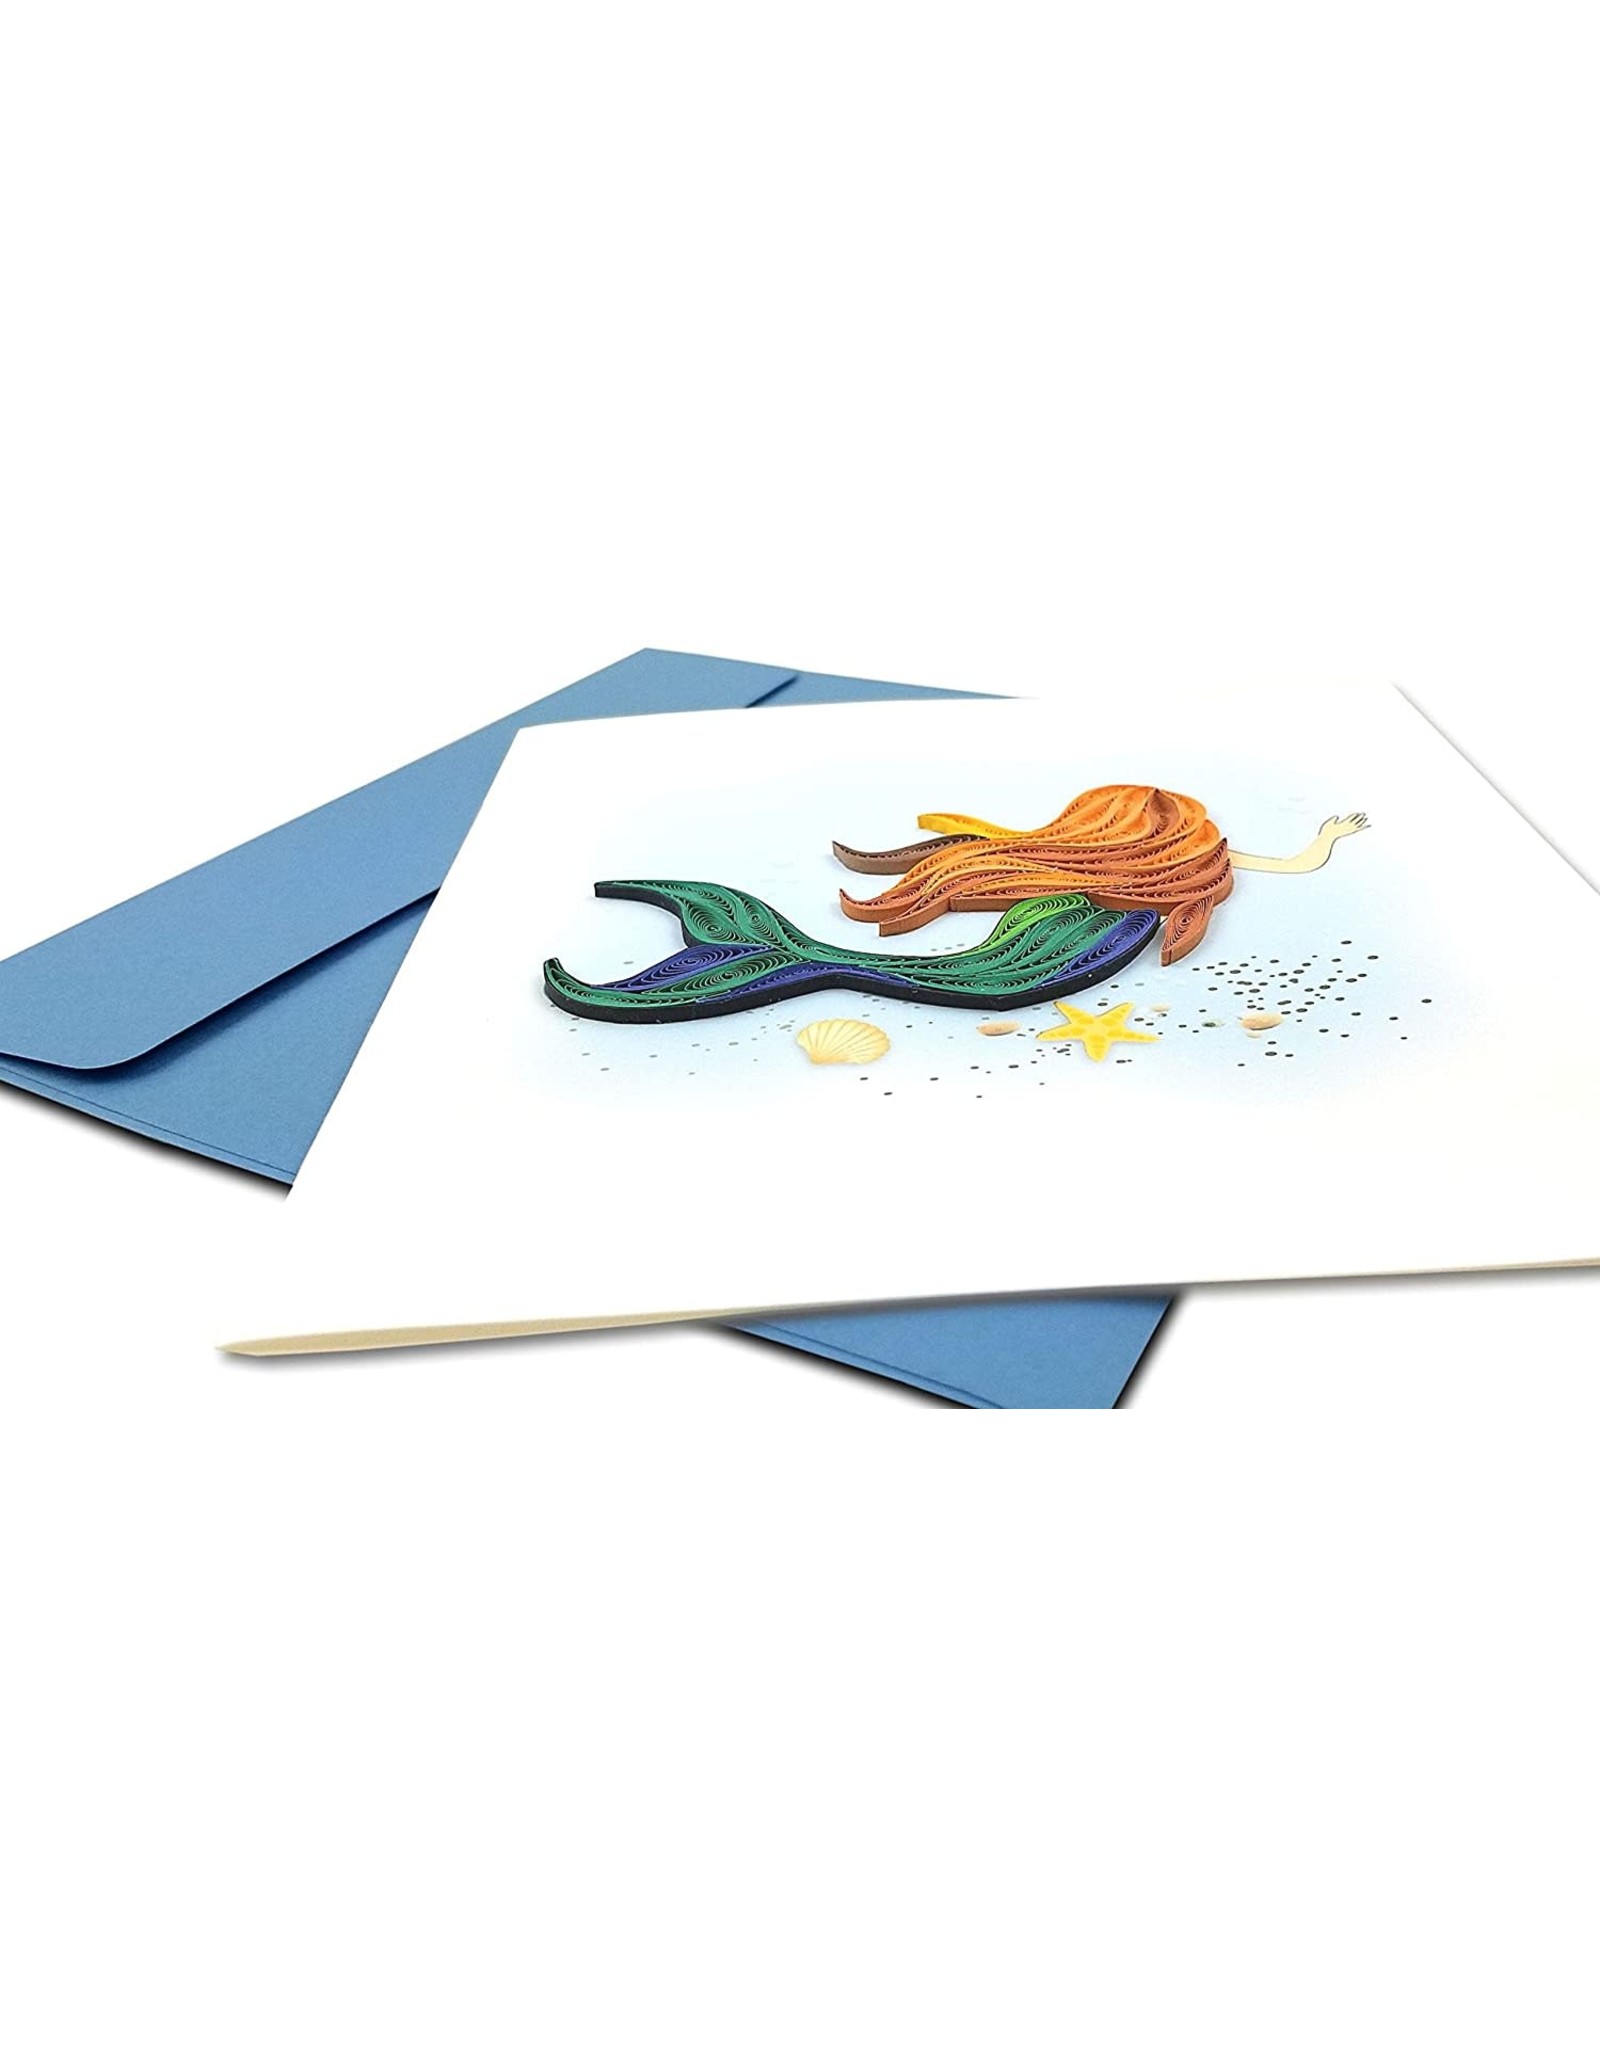 Quilling Card Quilled Mermaid Greeting Card